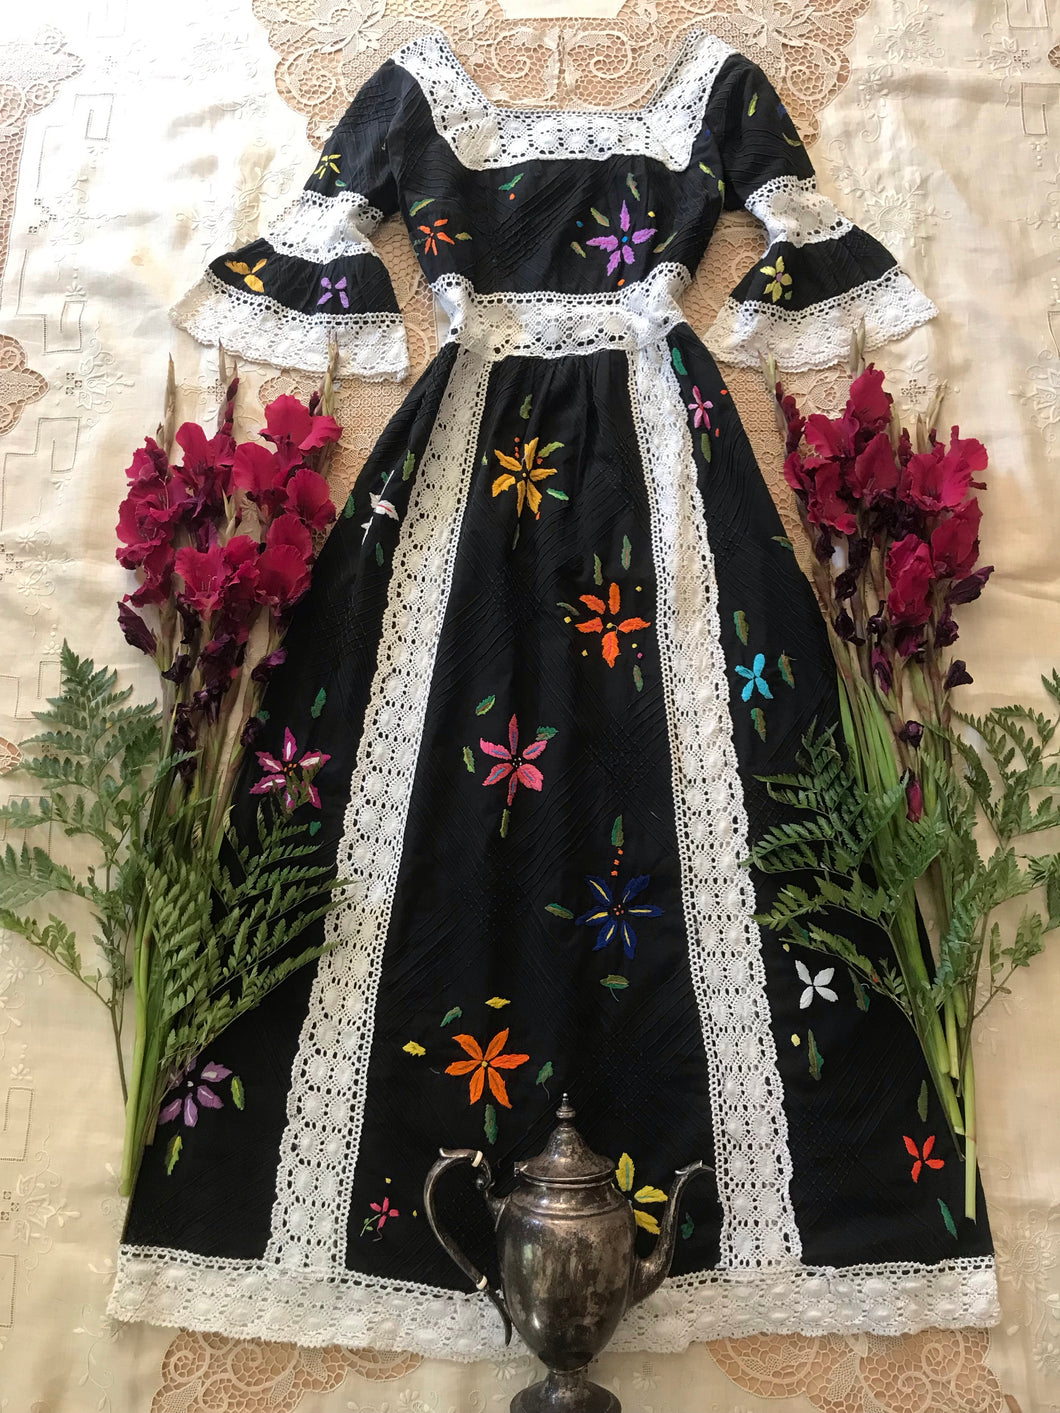 Authentic 1970’s vintage black floral dress from Mexico 🌿⚔️🖤⚔️🌿